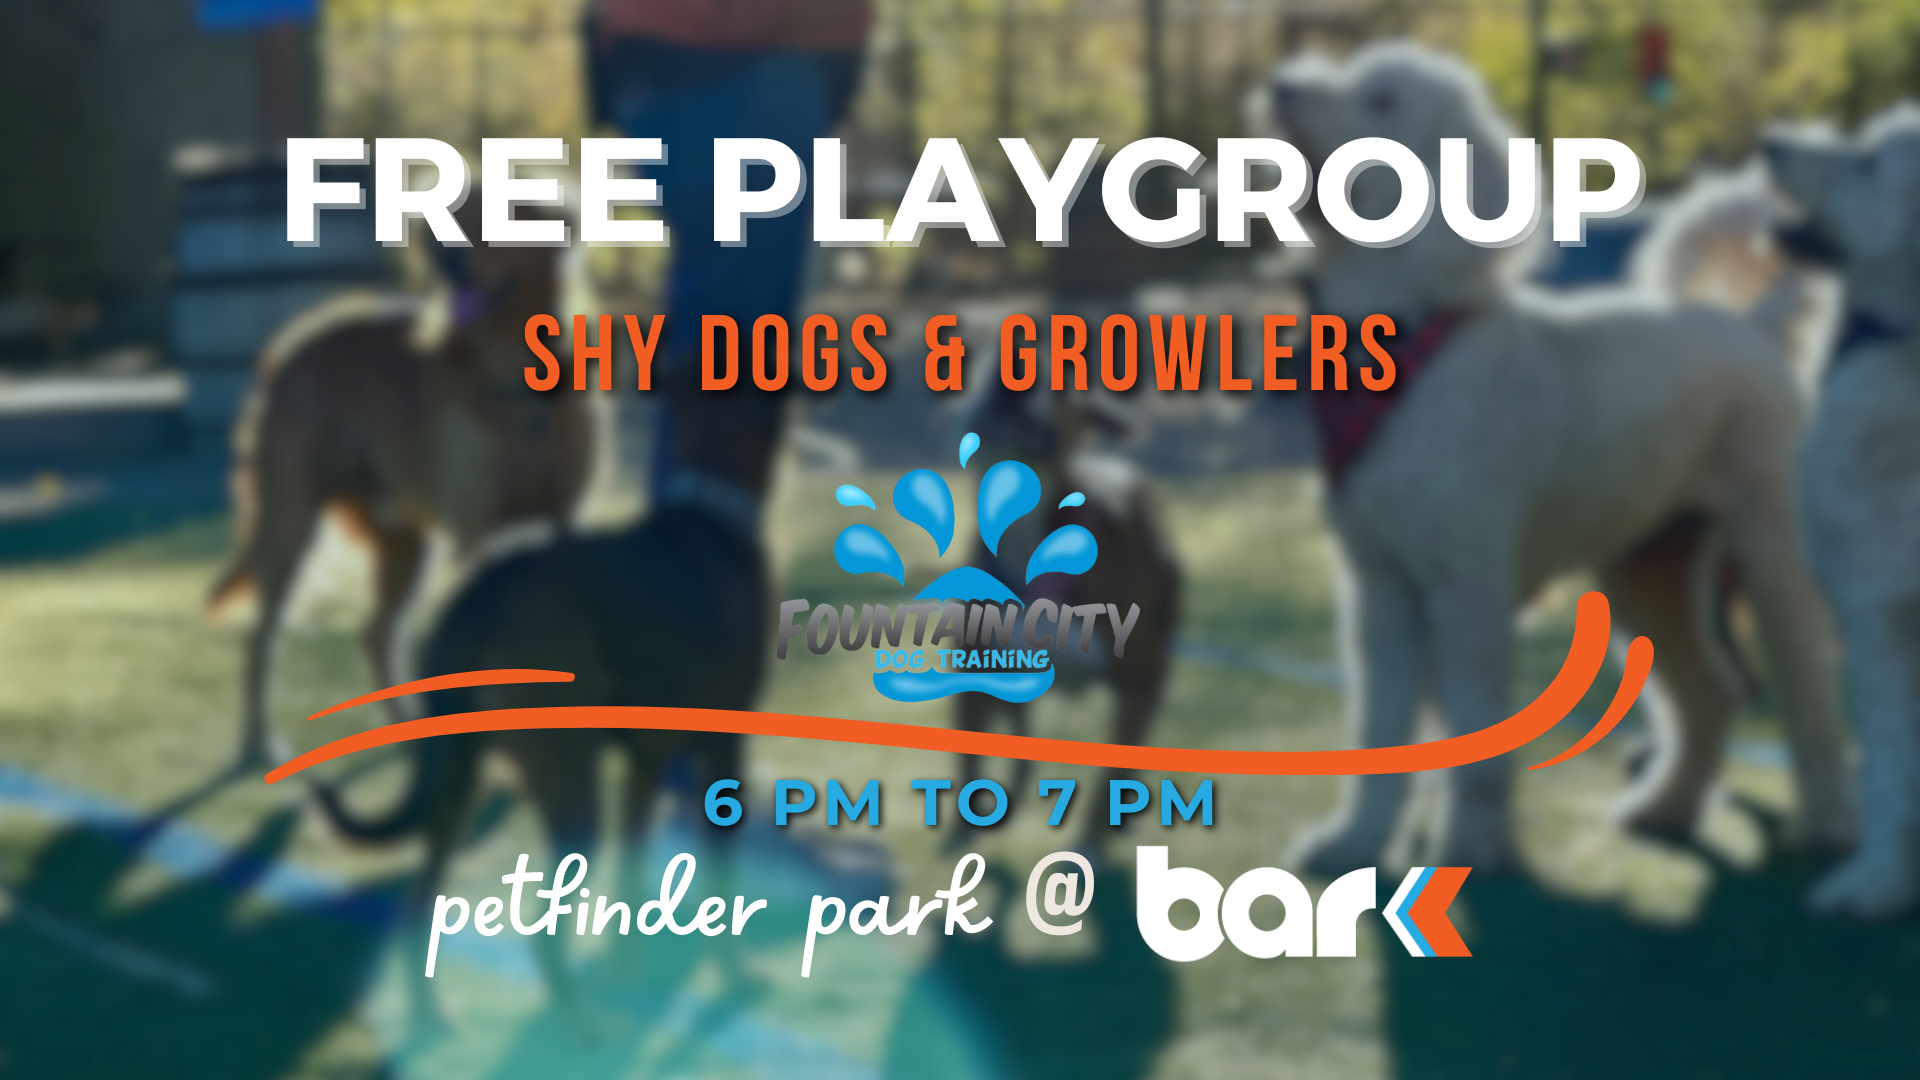 Free playgroup for shy dogs and growlers. Fountain city dog training at petfinder park. 6pm to 7 pm.